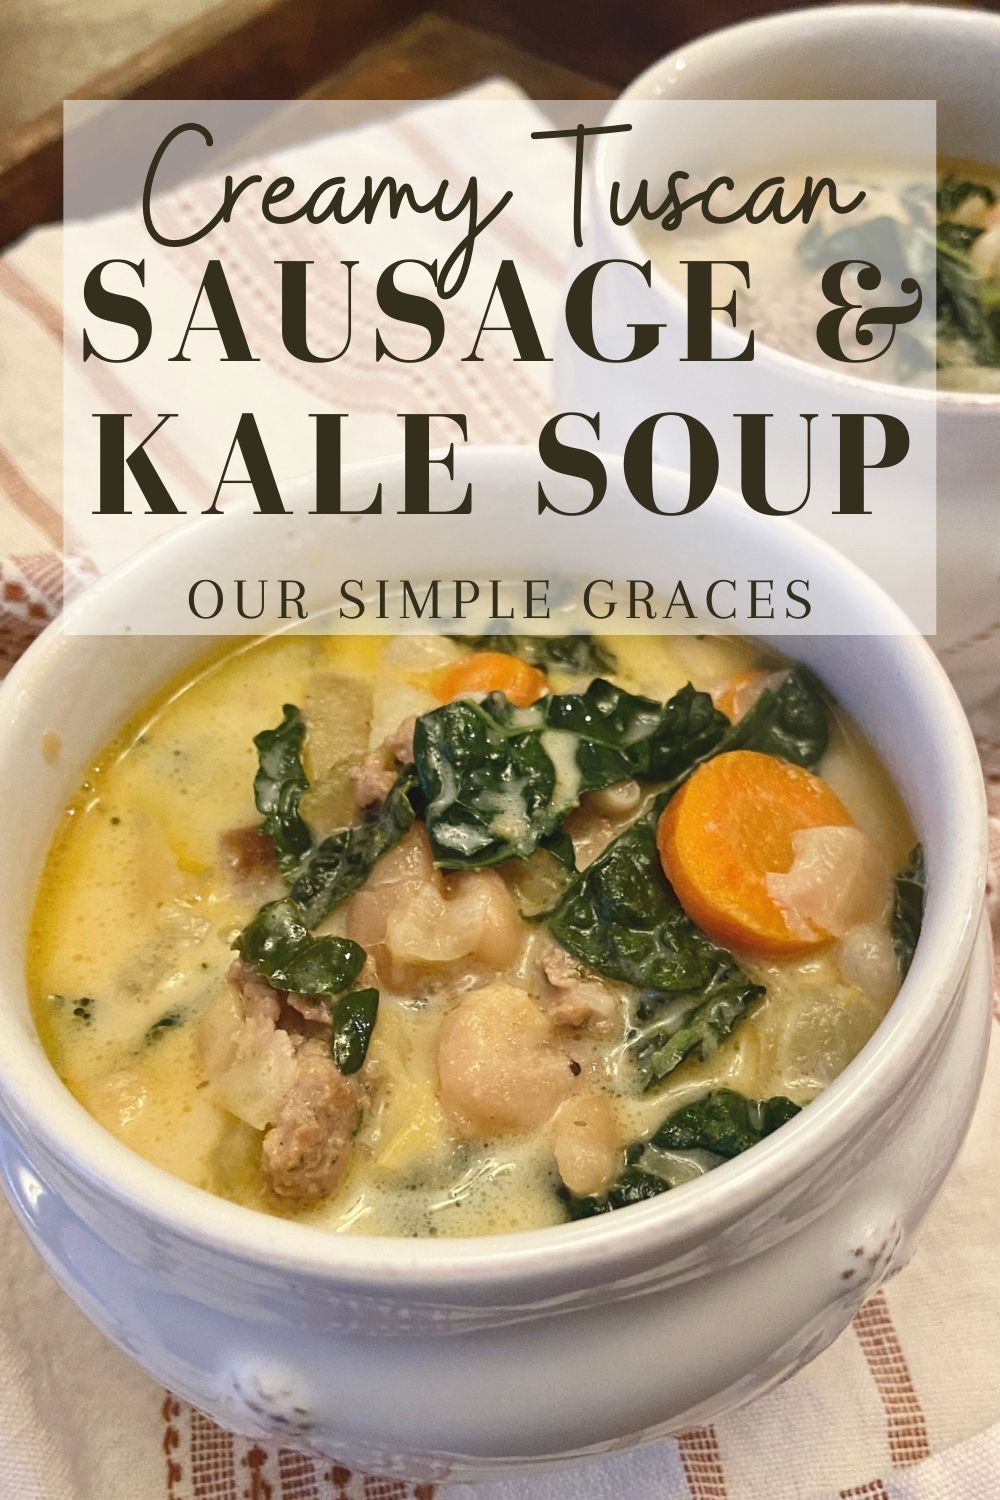 image of two soup bowls on kitchen table filled with zuppa toscana and text over image with words creamy tuscan sausage and kale soup by our simple graces